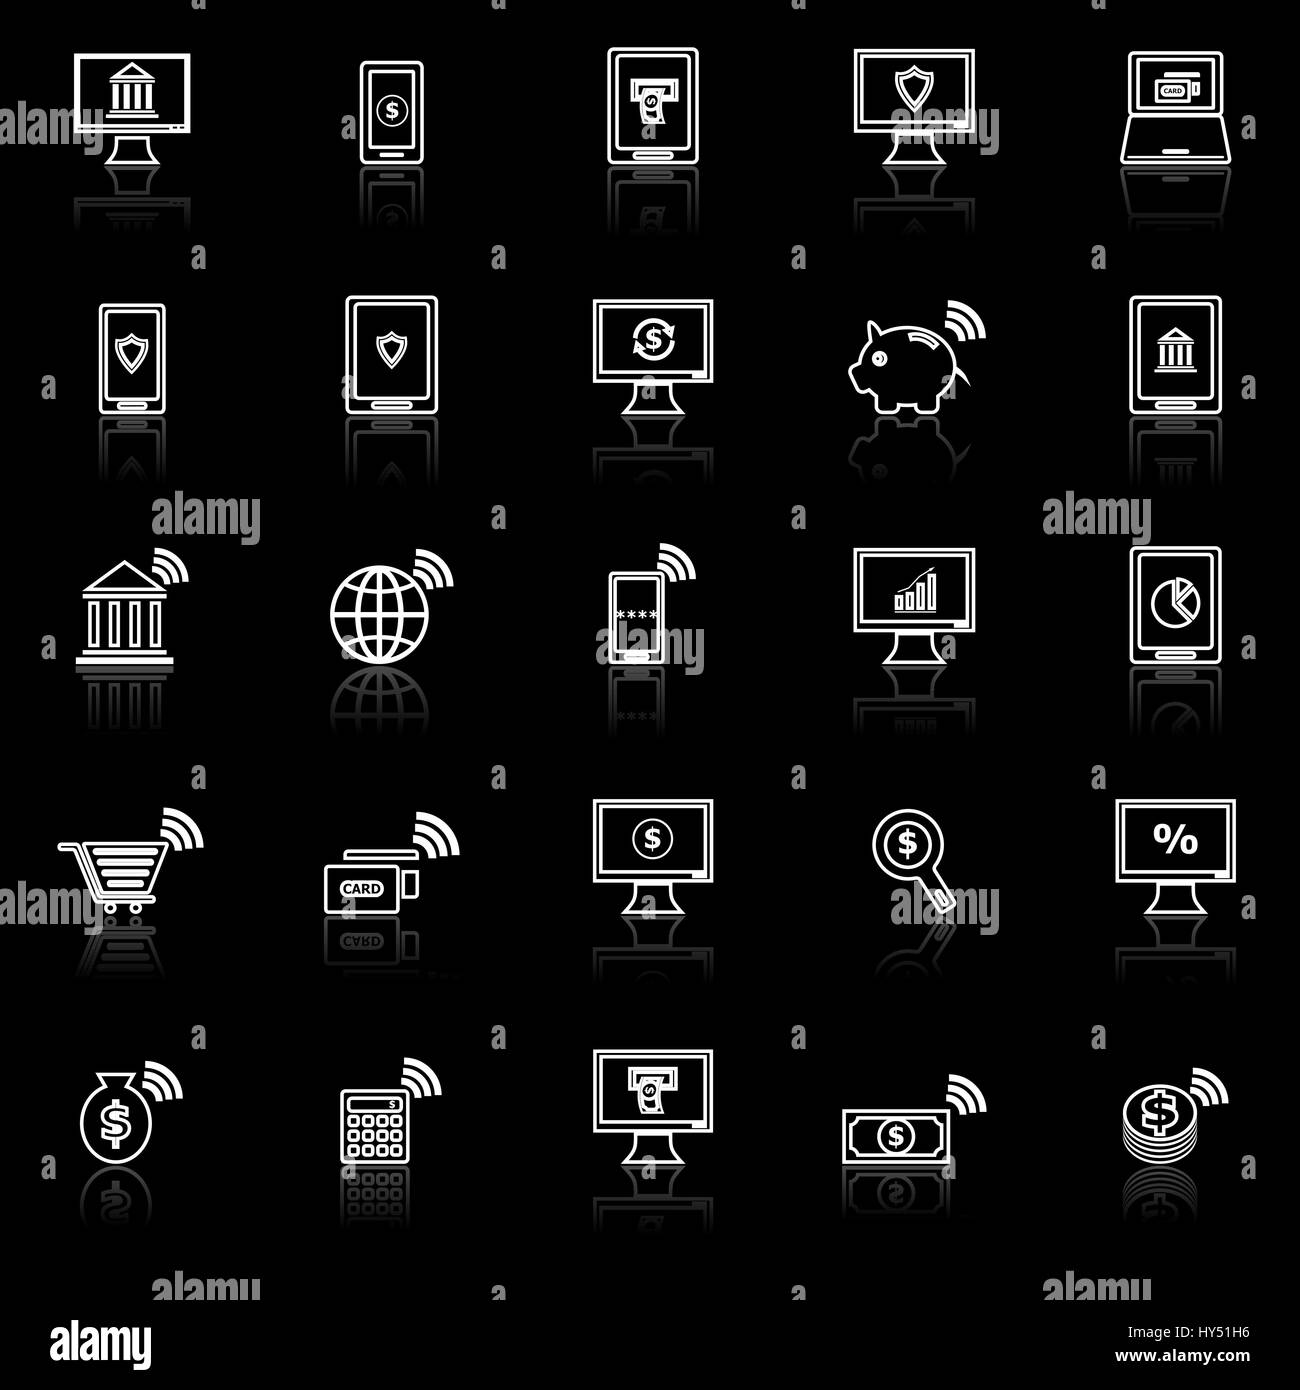 Online banking line icons with reflect on black background, stock vector Stock Vector